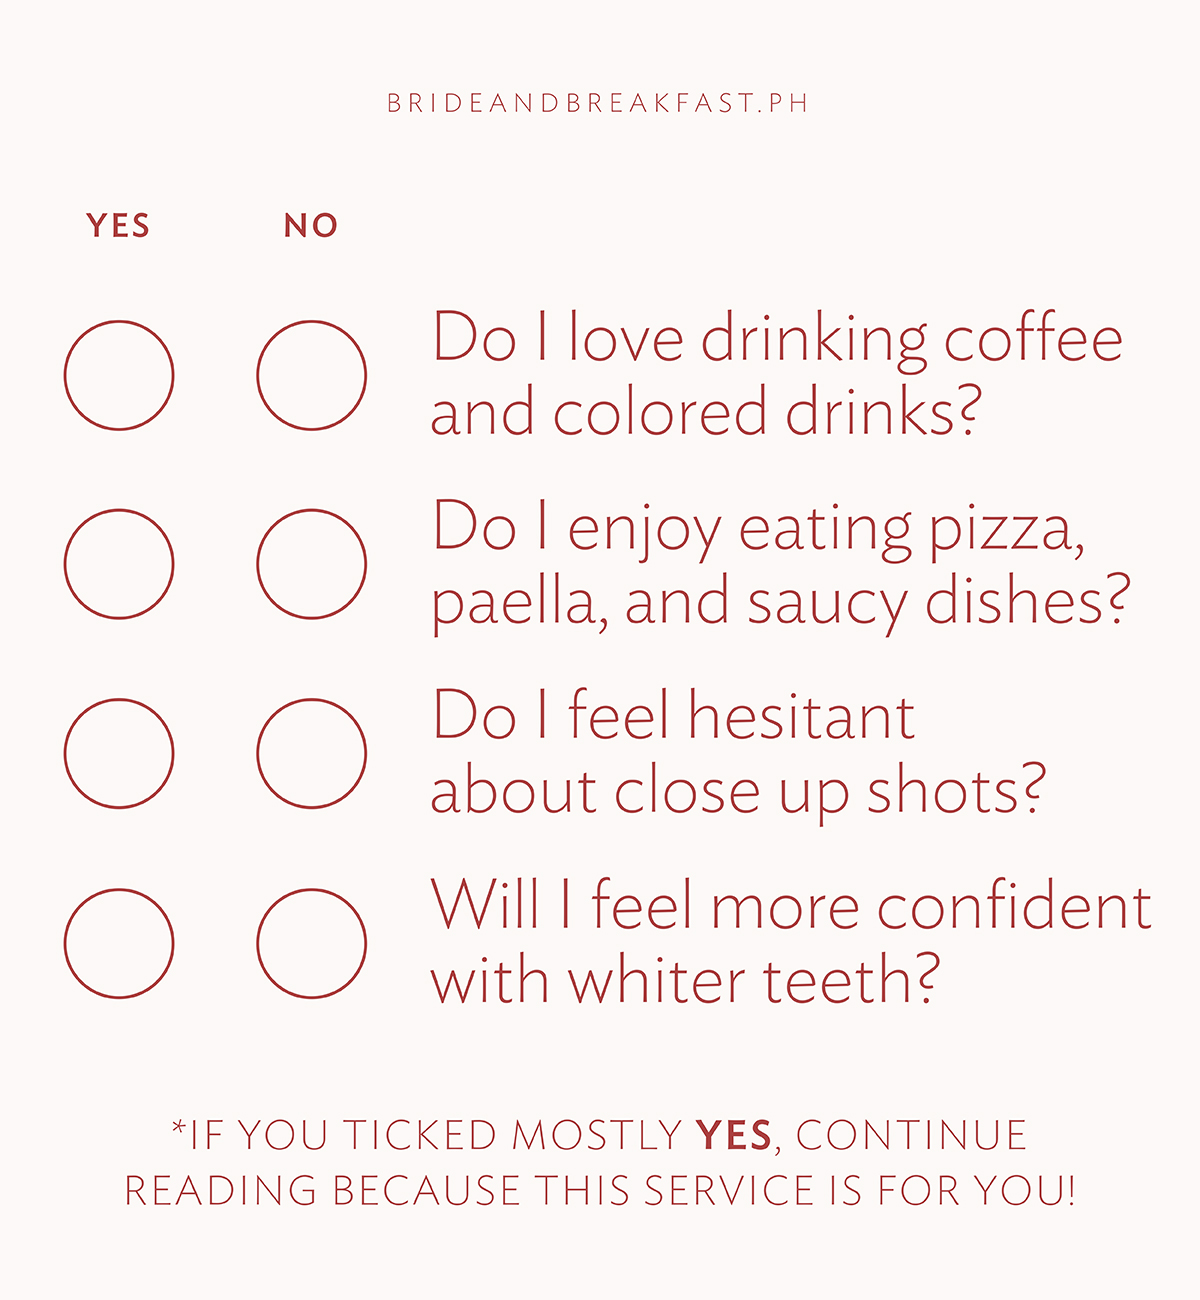 Do I love drinking coffee and colored drinks? Do I enjoy eating pizza, paella, and saucy dishes? Do I feel hesitant with close-up shots? Will I feel more confident with whiter teeth? *If you ticked mostly yes, continue reading because this service is for you!